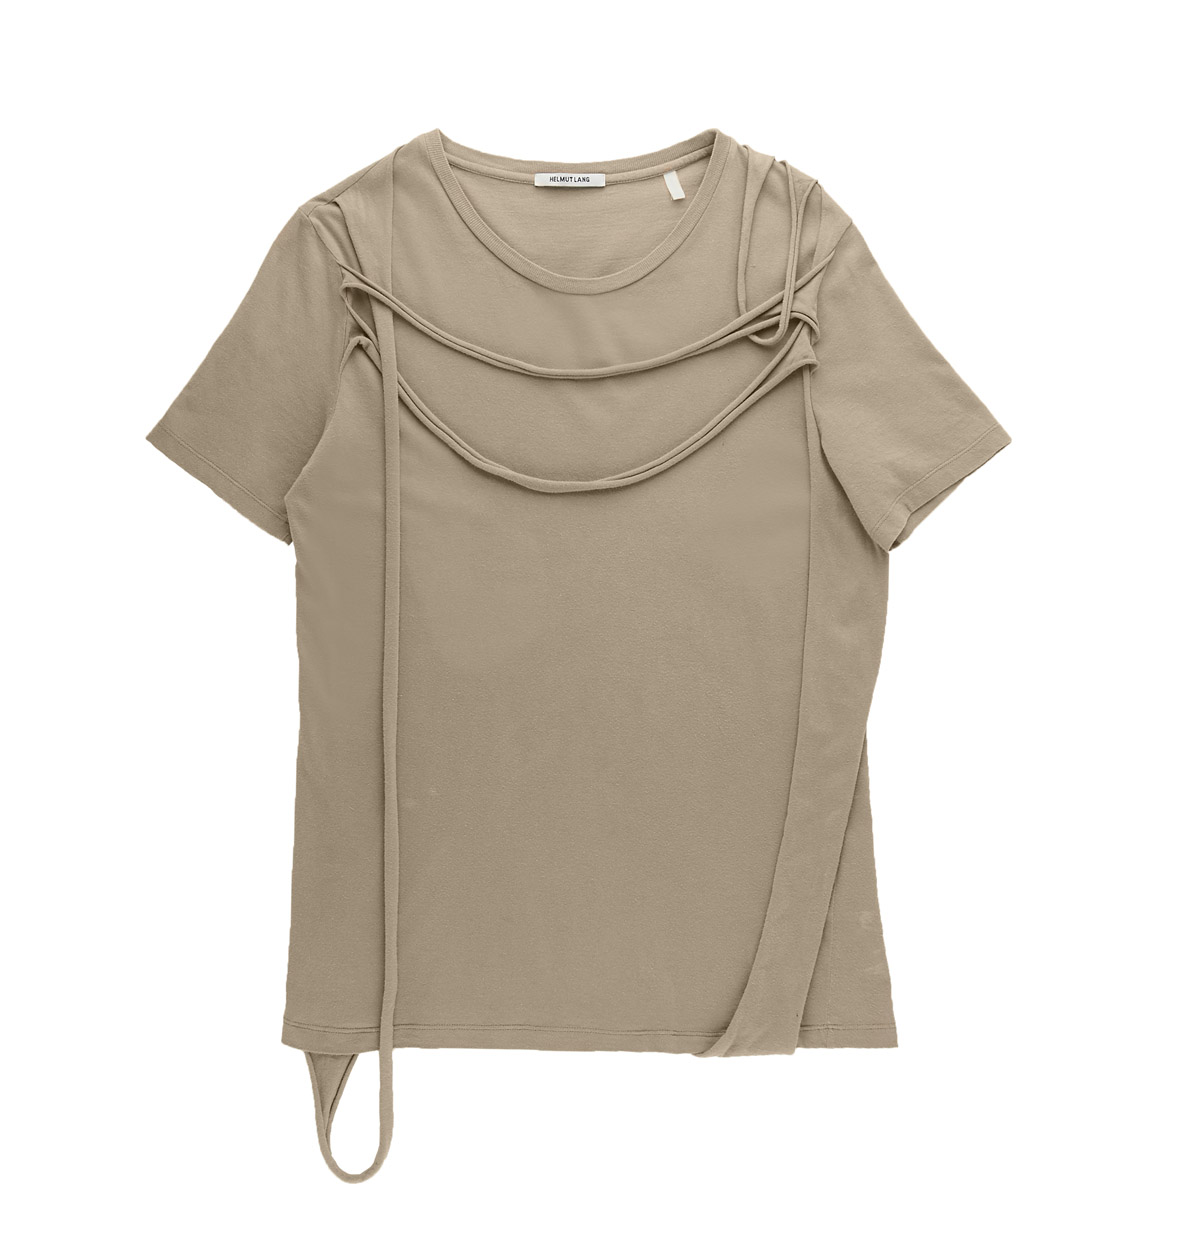 T-shirt in jersey with asymmetric layered strips, Helmut Lang S/S 2004.
